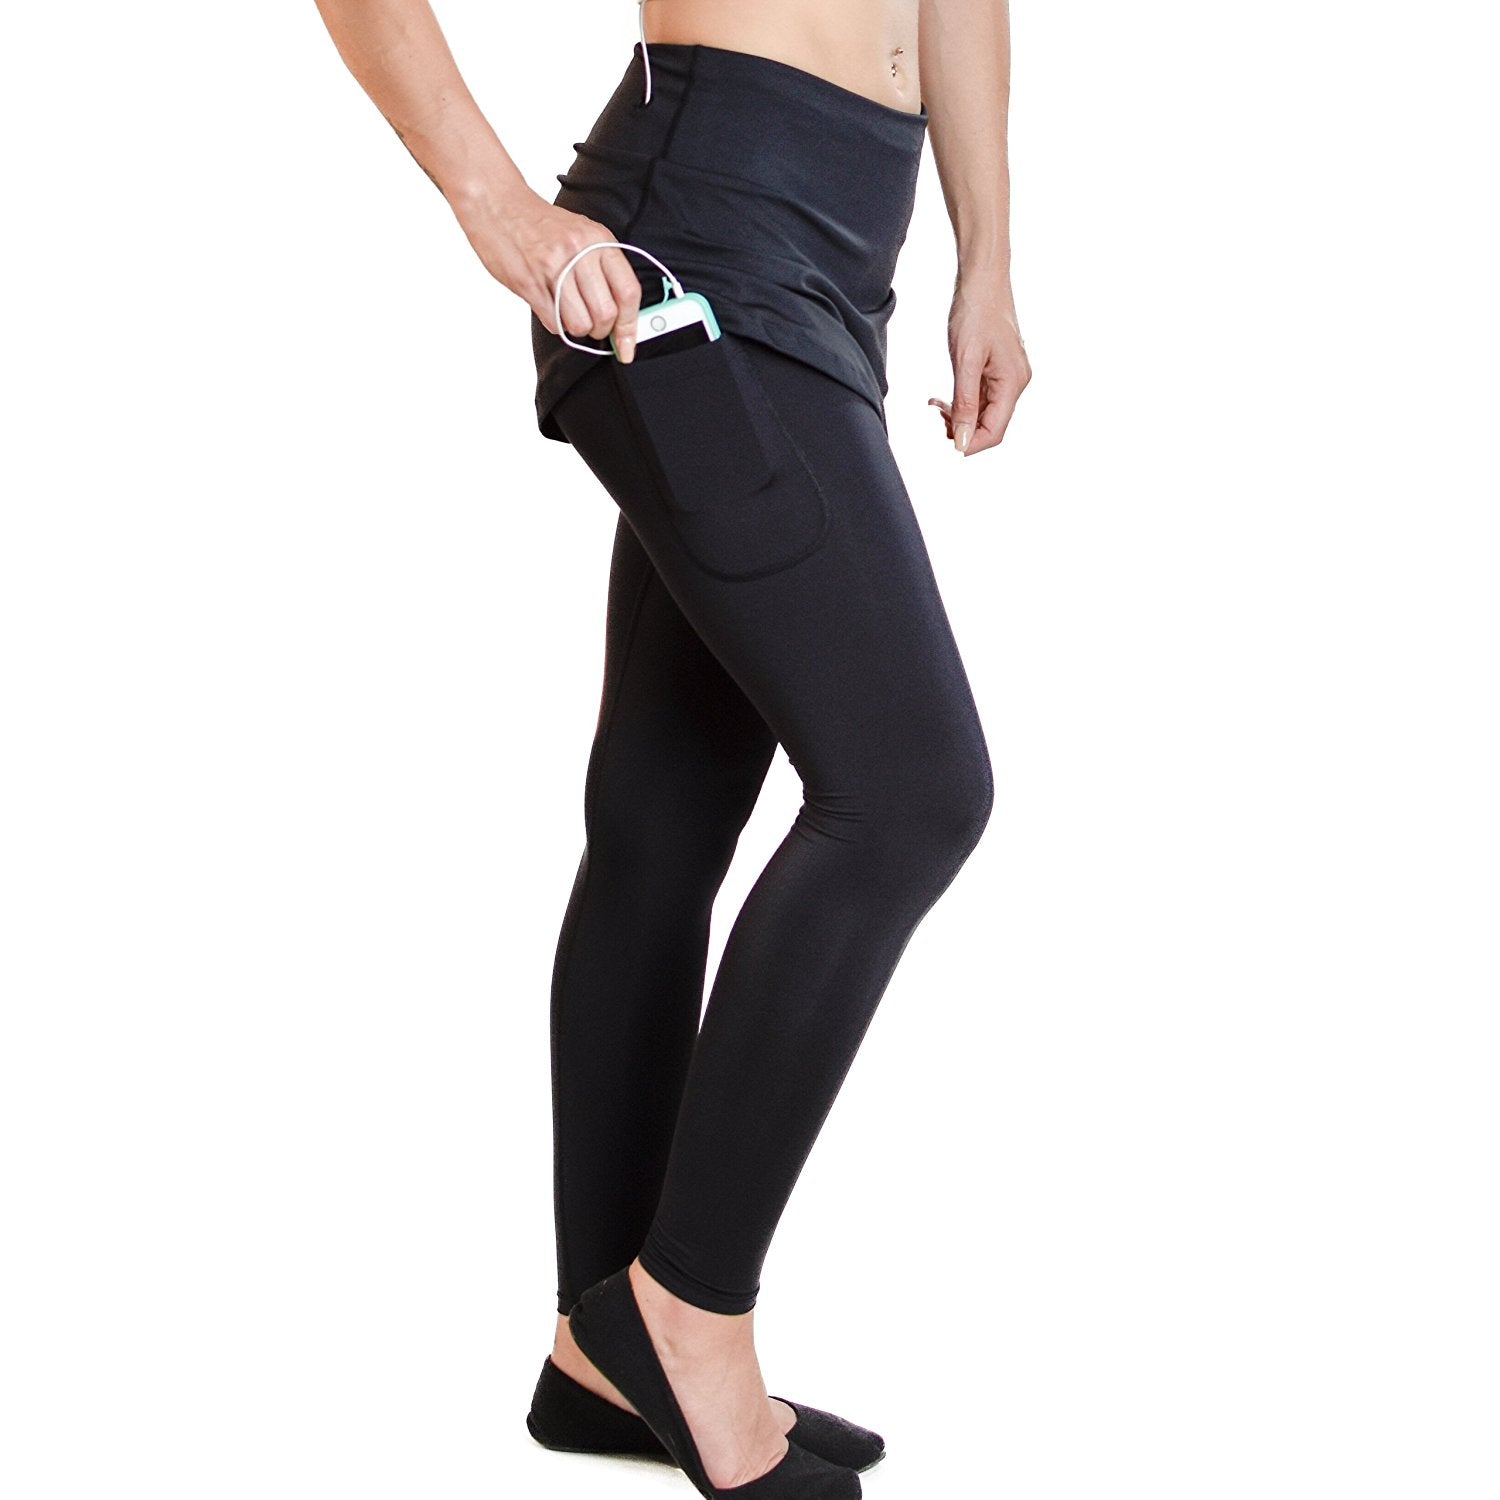 workout pants with skirt attached